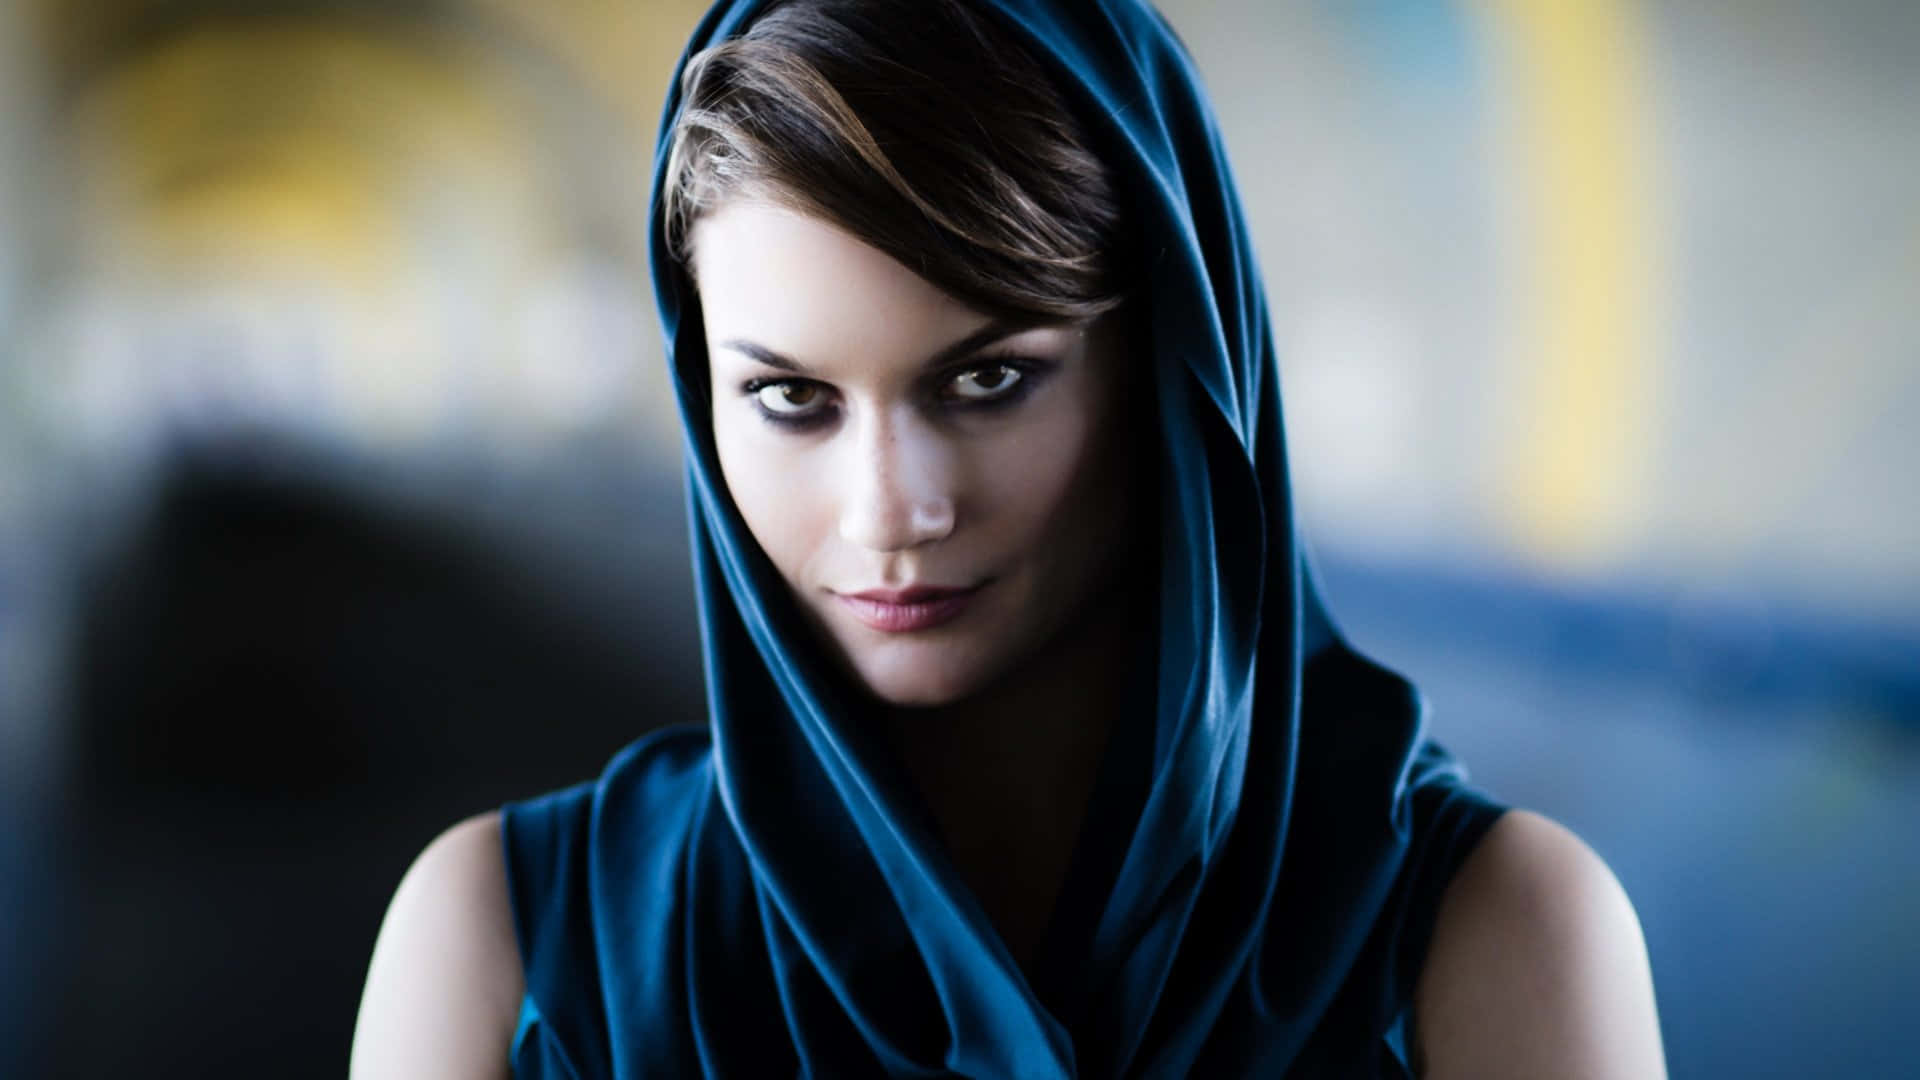 Woman With Headscarf Face Reference Wallpaper